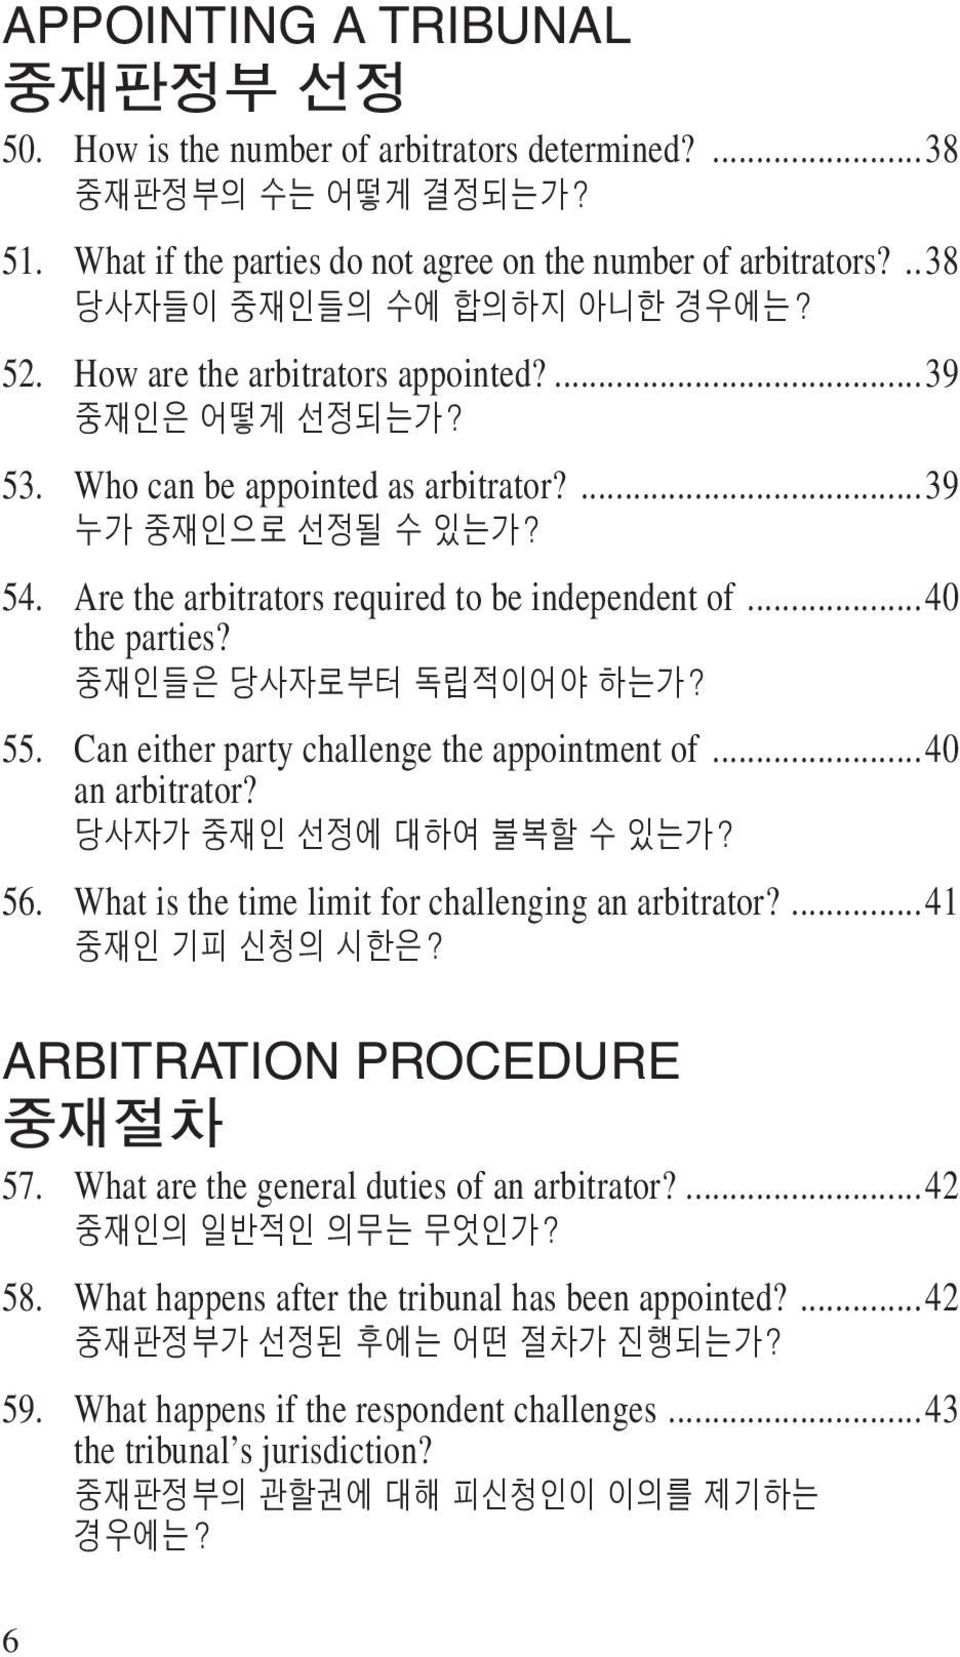 Are the arbitrators required to be independent of...40 the parties? 중재인들은 당사자로부터 독립적이어야 하는가? 55. Can either party challenge the appointment of...40 an arbitrator? 당사자가 중재인 선정에 대하여 불복할 수 있는가? 56.